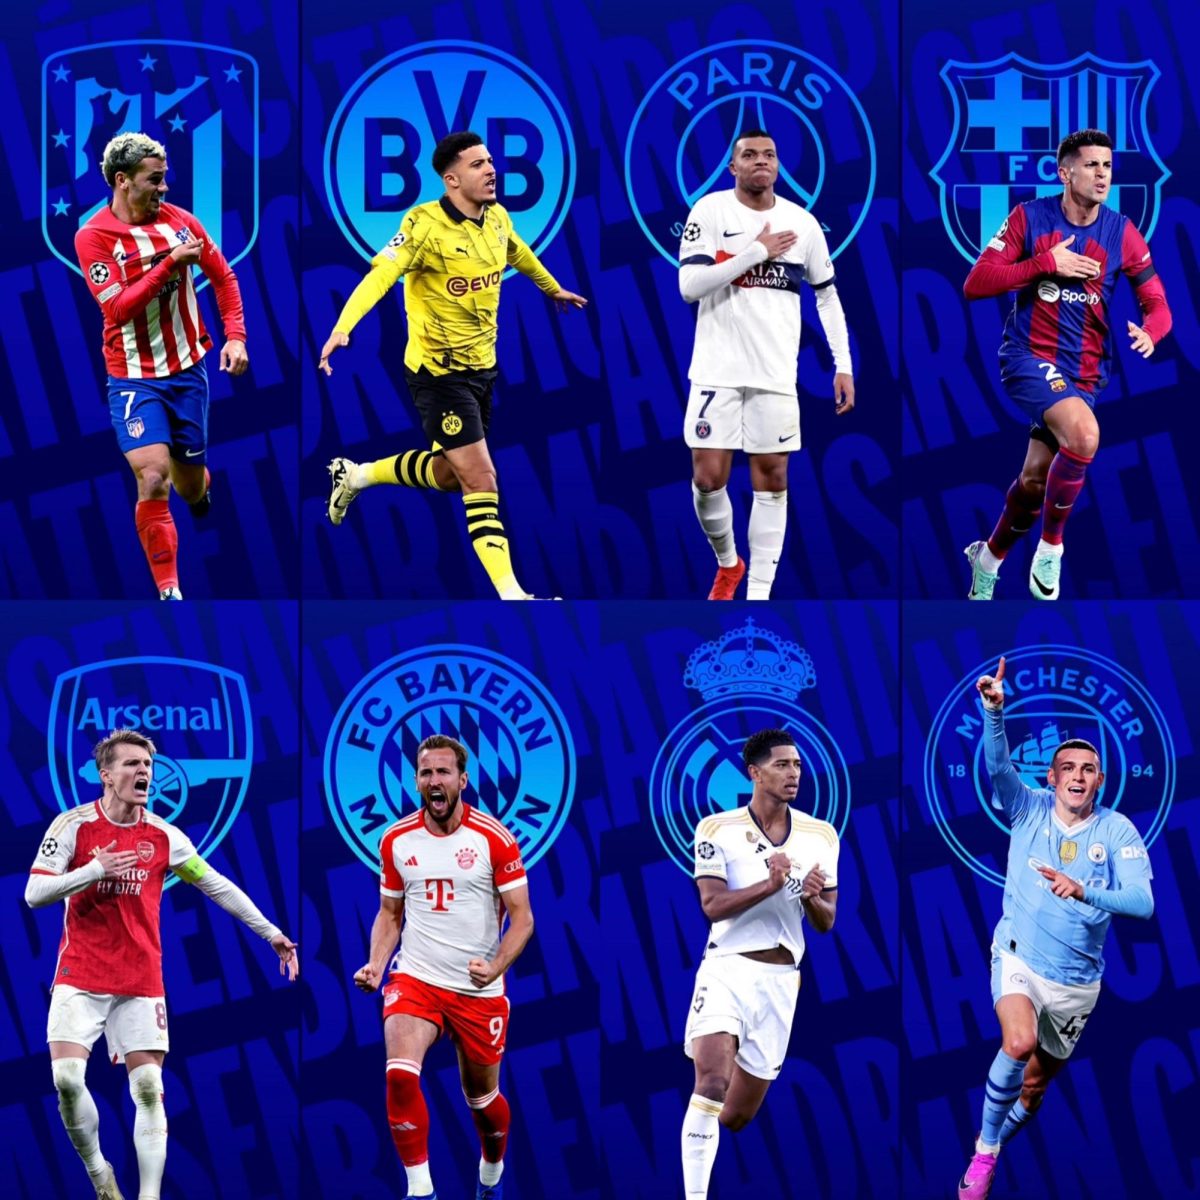 The+Champions+League+quarterfinals+look+like+they+will+be+one+to+remember.+%28Courtesy+of+Instagram%29